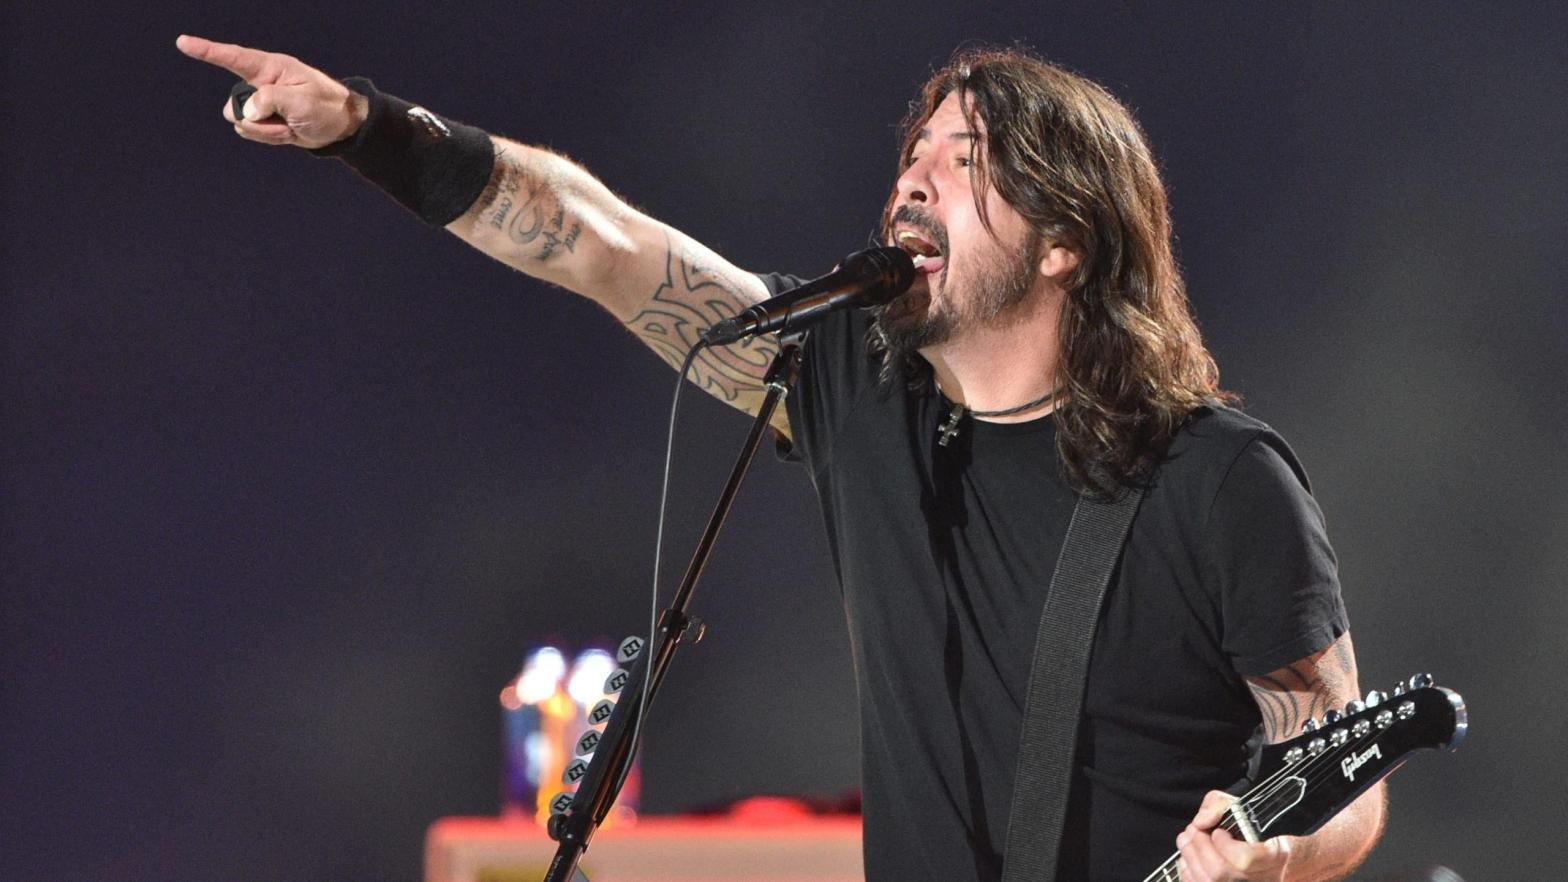 Dave Grohl of the Foo Fighters. (Photo: Getty, Getty Images)